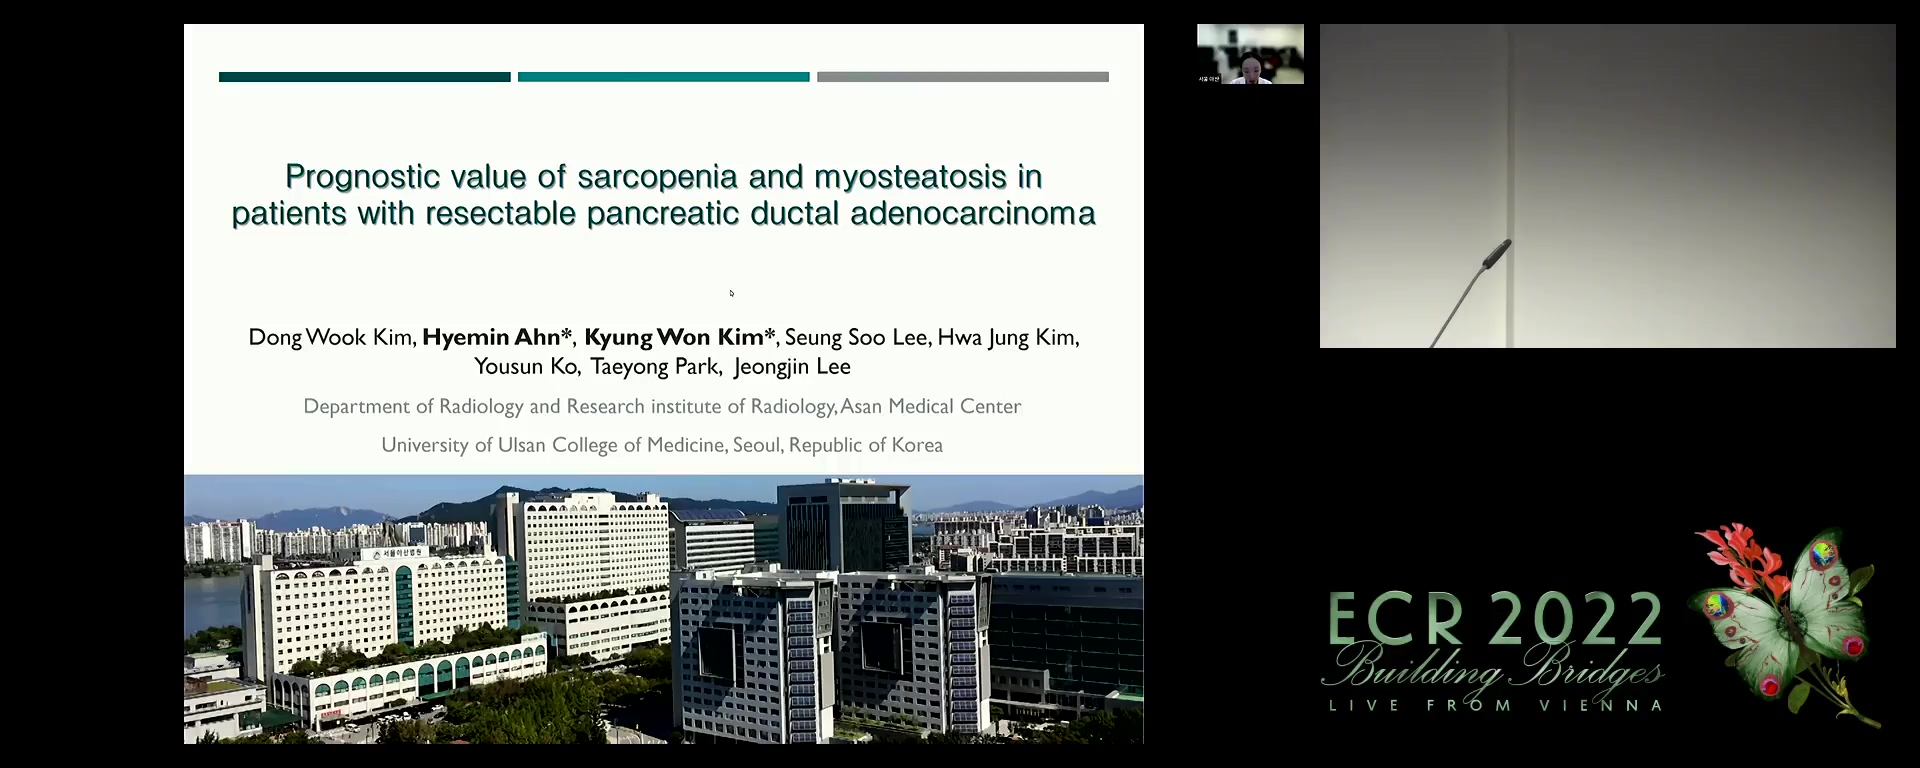 Prognostic effect of sarcopenia and myosteatosis in patients with resectable pancreatic ductal adenocarcinoma